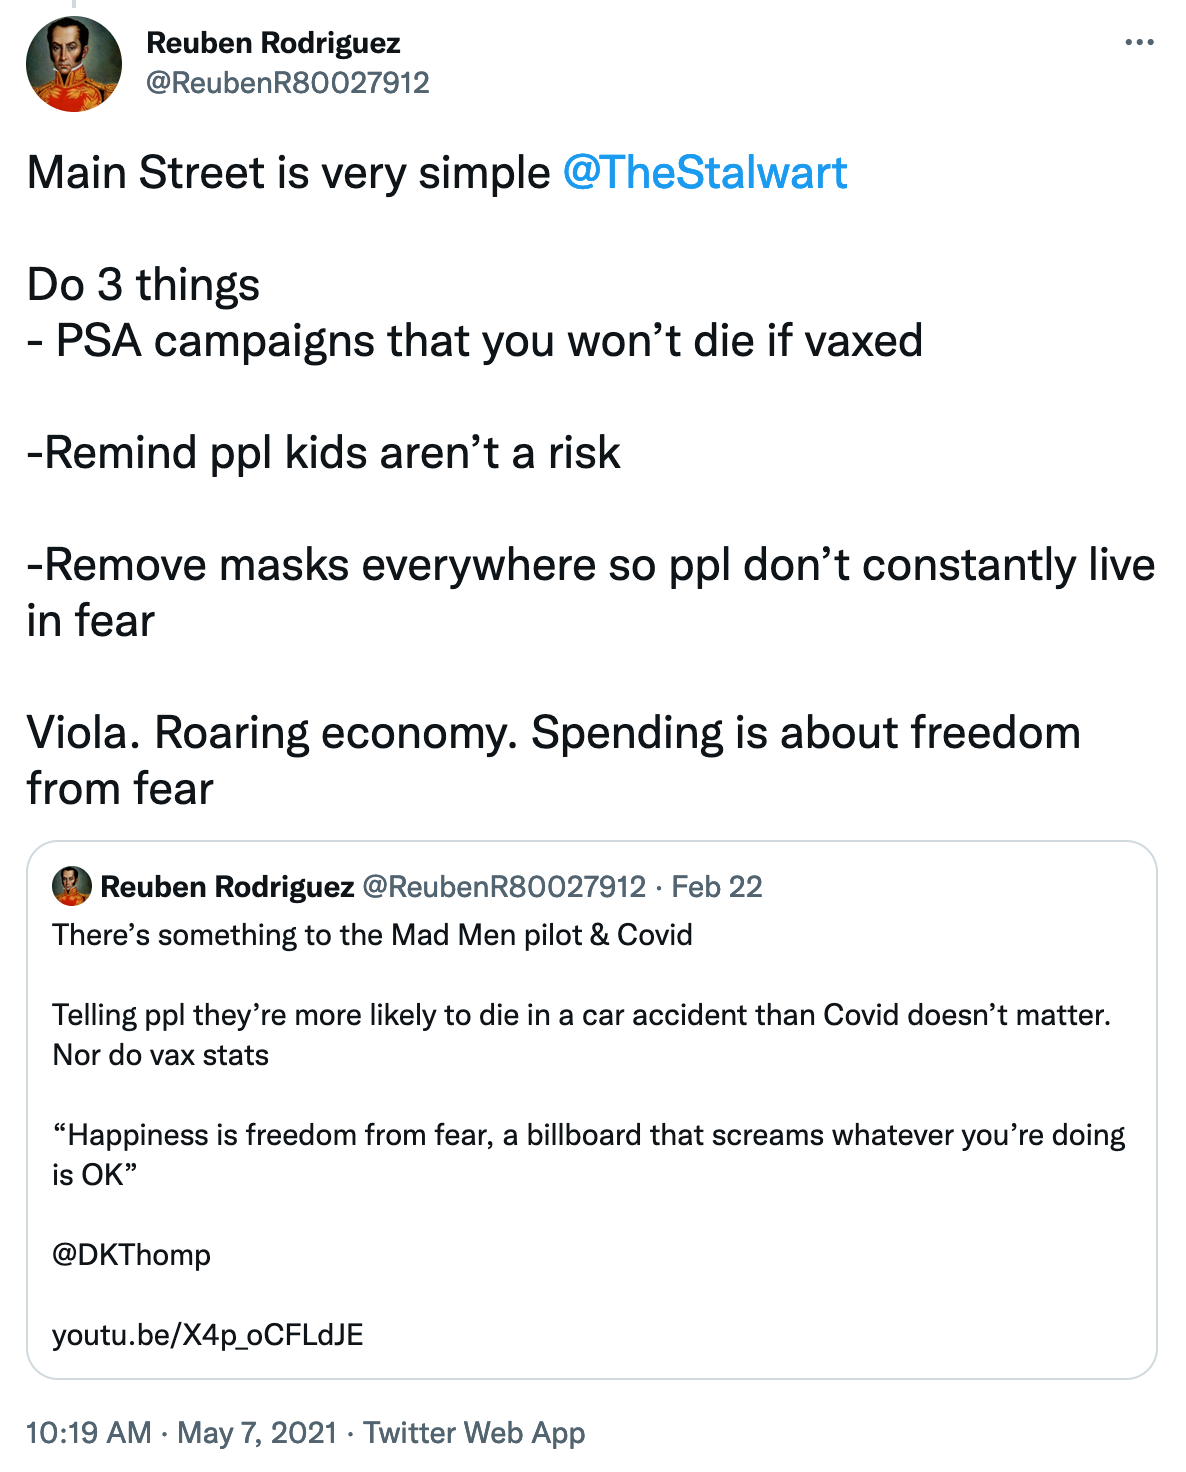 Tweet says Main Street is Very simple. Do 3 things PSA campaigns that you won’t die if vaxxed. Remind people kids aren’t a risk. Remove masks everywhere so people don’t constantly live in fear. Voila. Roaring economy. Spending is about freedom from fear. Quote-tweet says There’s something to the Mad Men pilot and covid. Telling people they’re more likely to die in a car accident than covid doesn’t matter. Nor do vax stats. Happiness is freedom from fear, a billboard that screams whatever you’re doing is ok